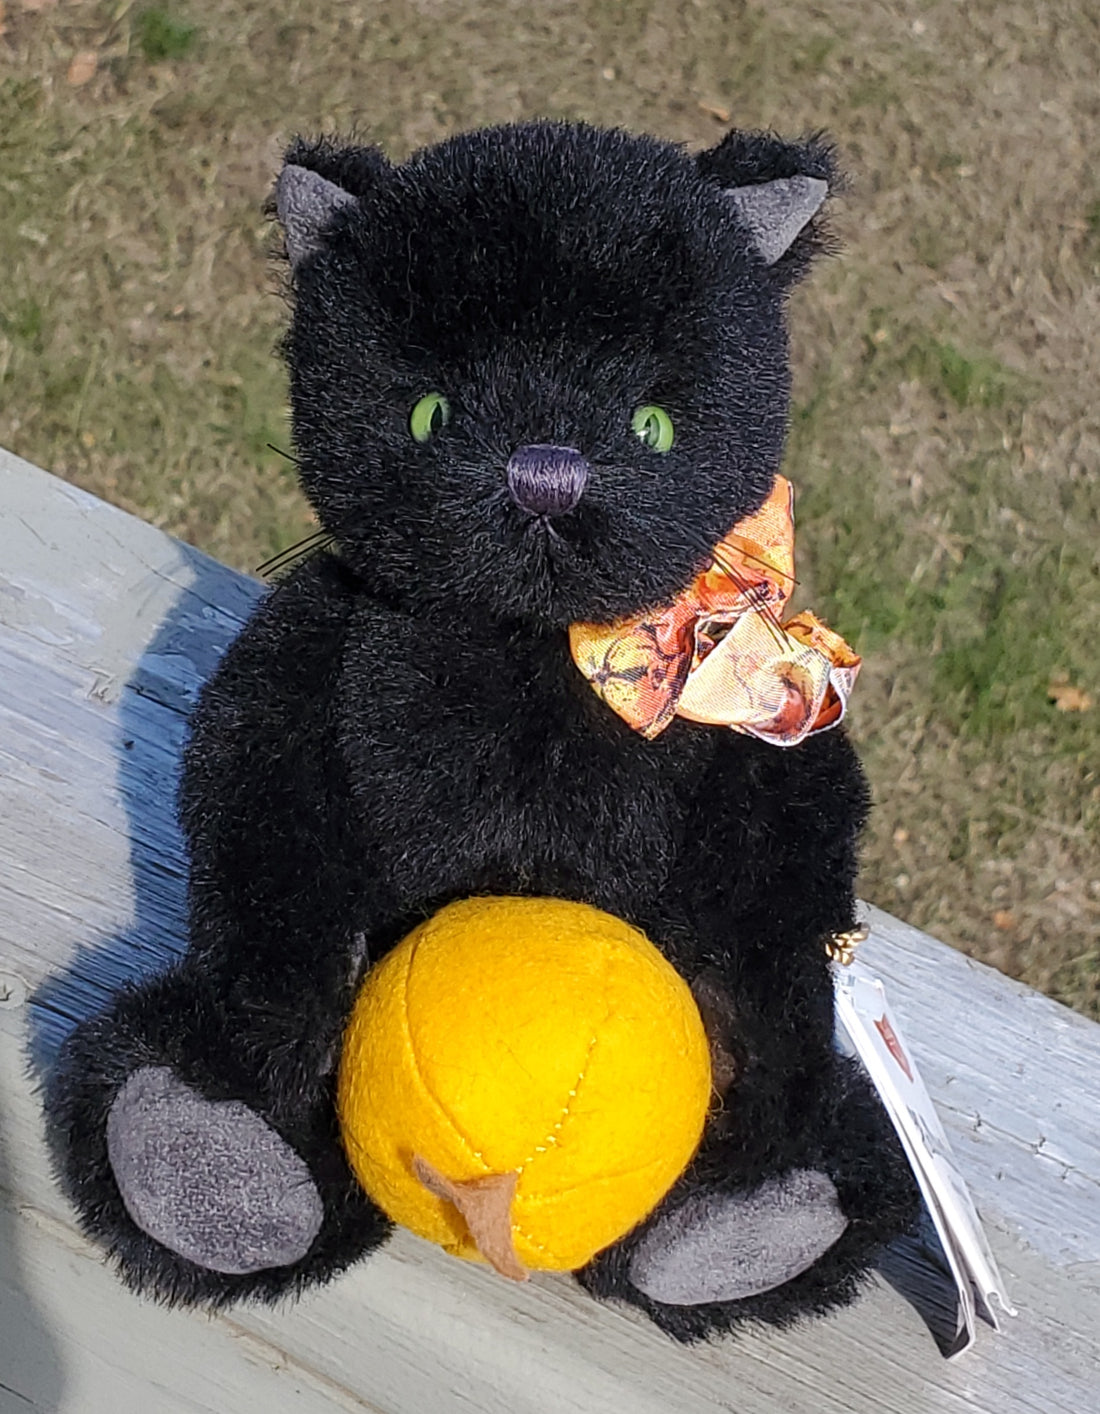 Halloween Cat - 7.5" Black, Mohair Cat by Teddy Hermann - Only 200 made!